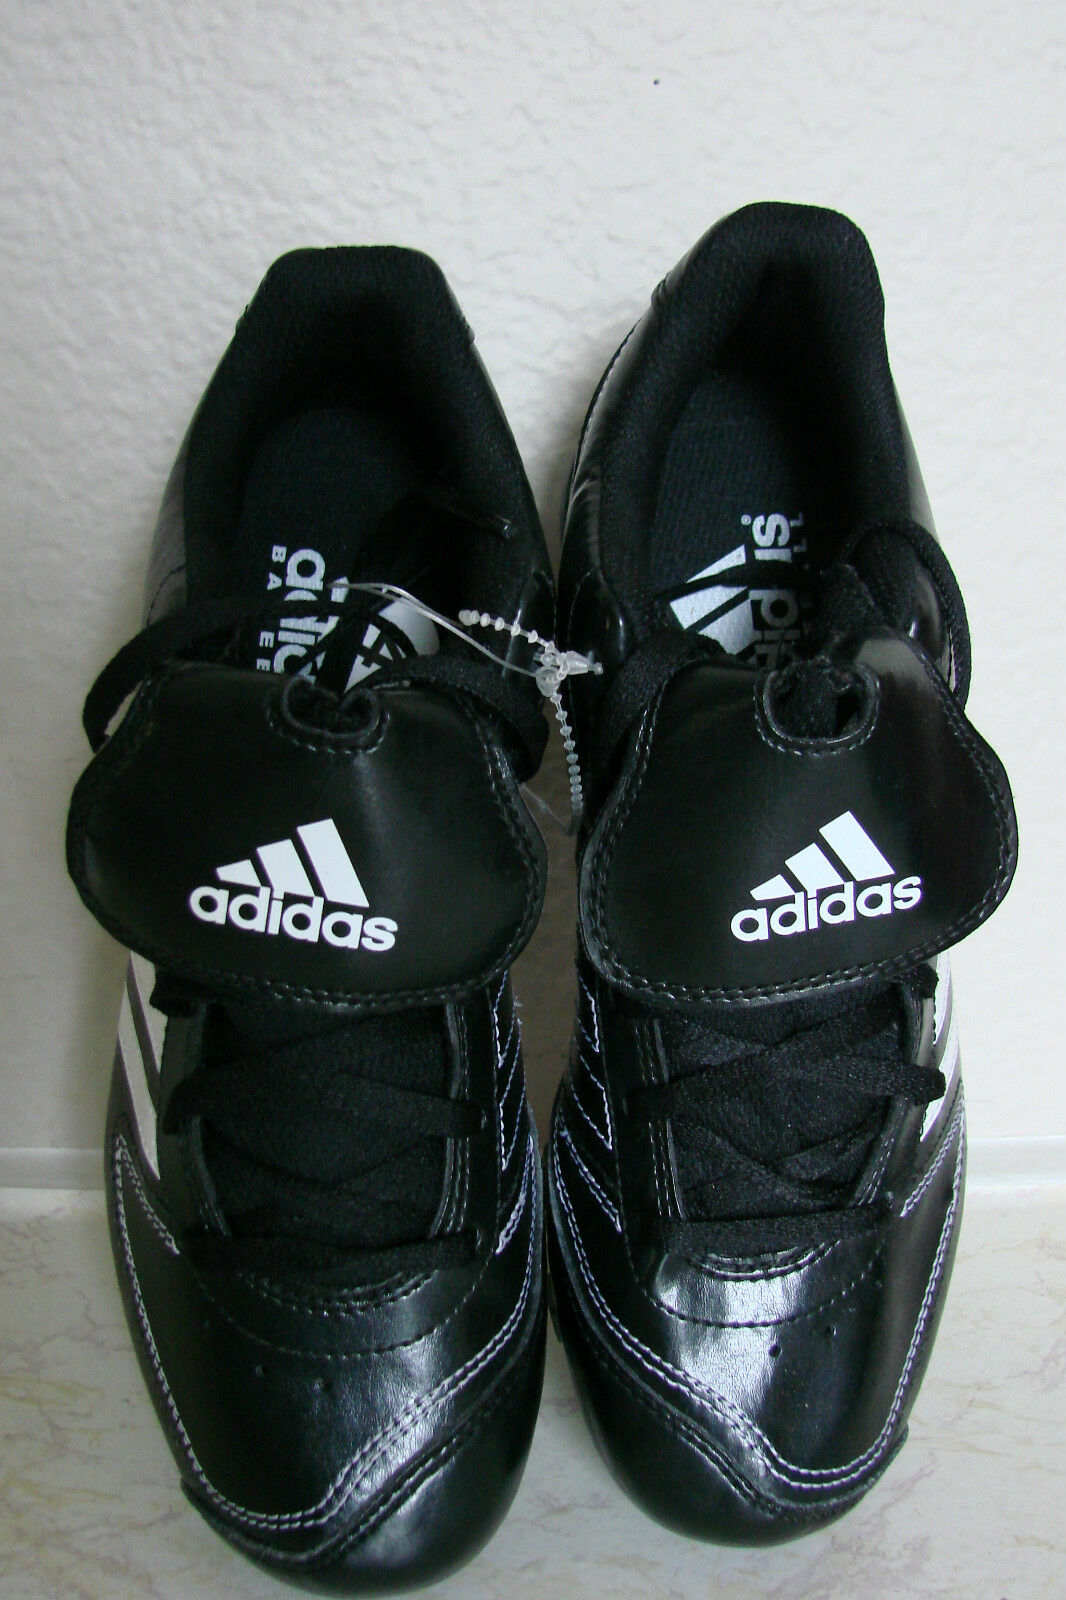 ADIDAS Tater 3 Low Baseball Cleats Athletic Boys Shoes Sz 4 NEW